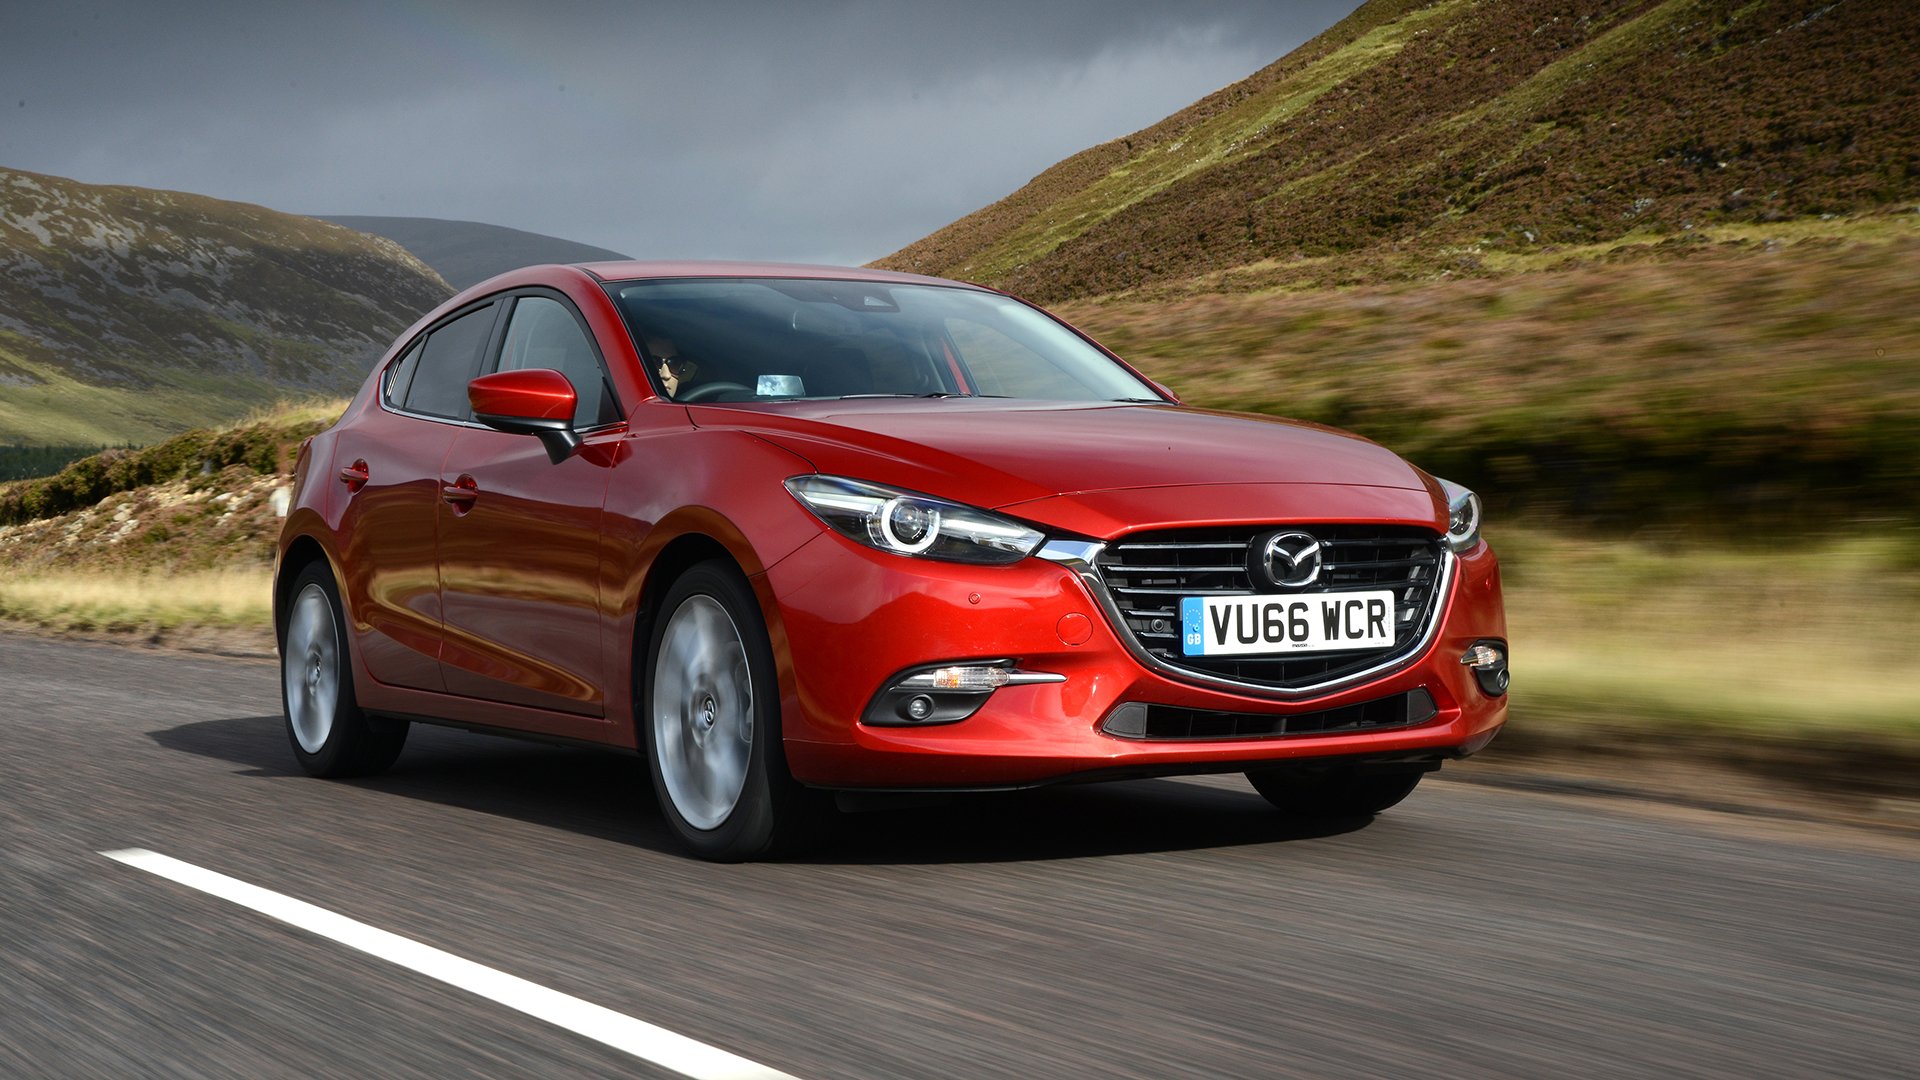 2017 Mazda 3 first drive review Auto Trader UK